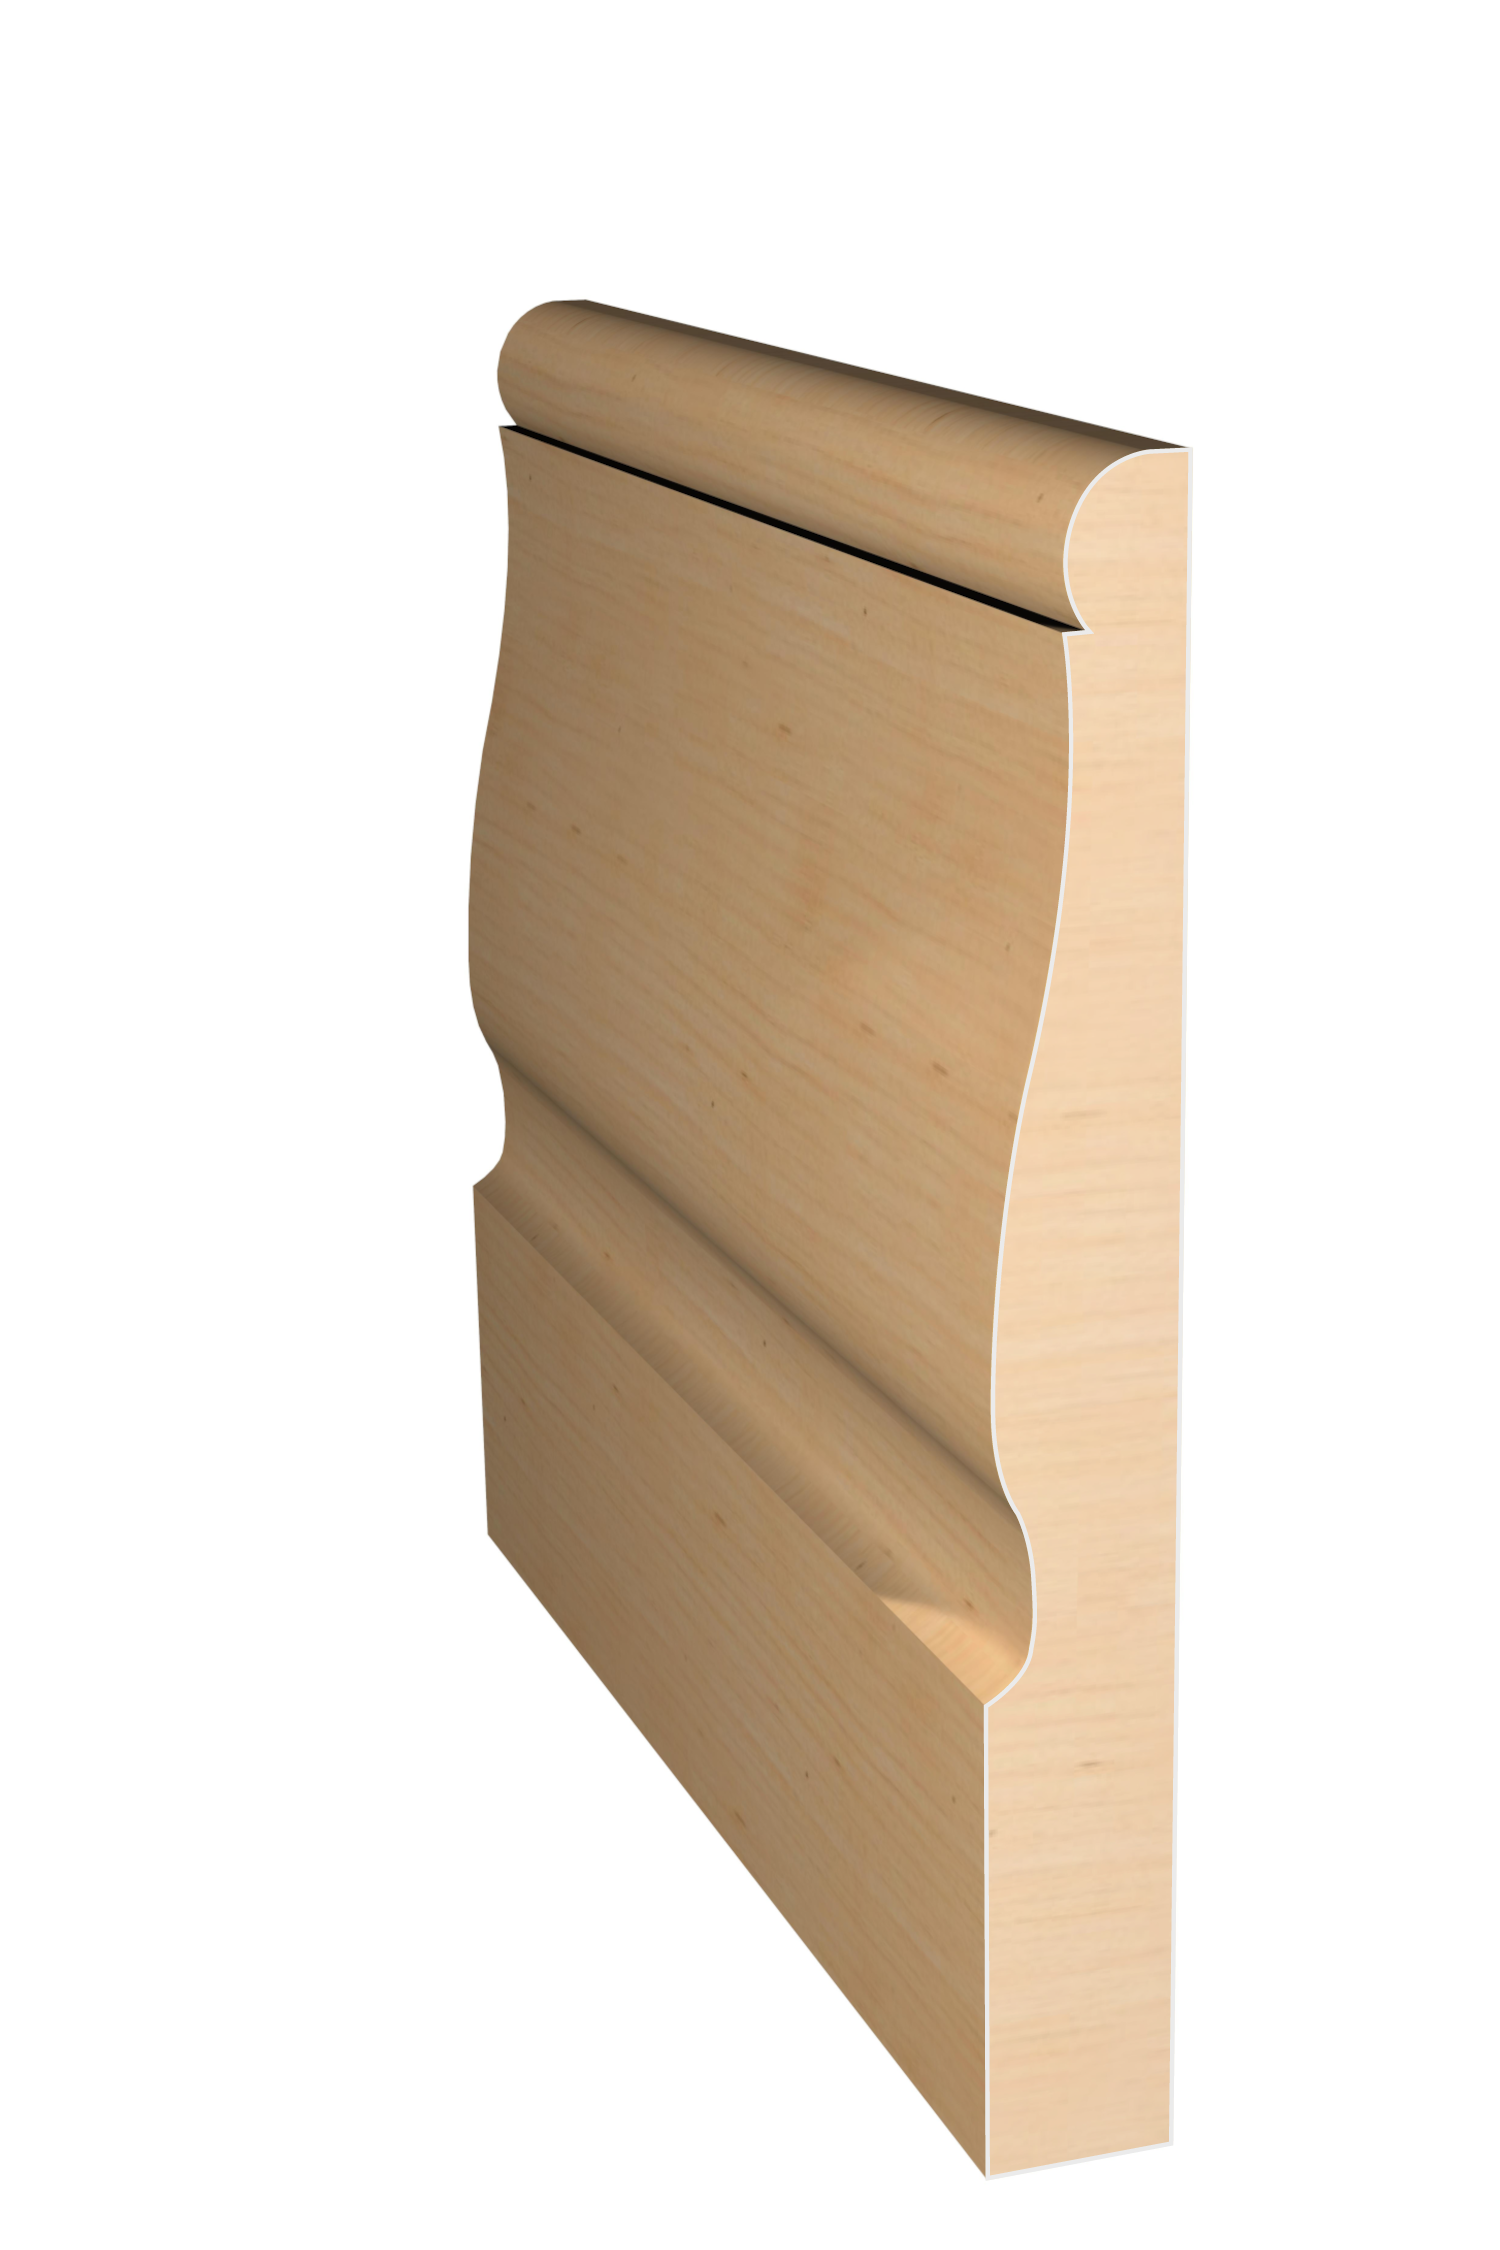 Three dimensional rendering of custom base wood molding BAPL51423 made by Public Lumber Company in Detroit.